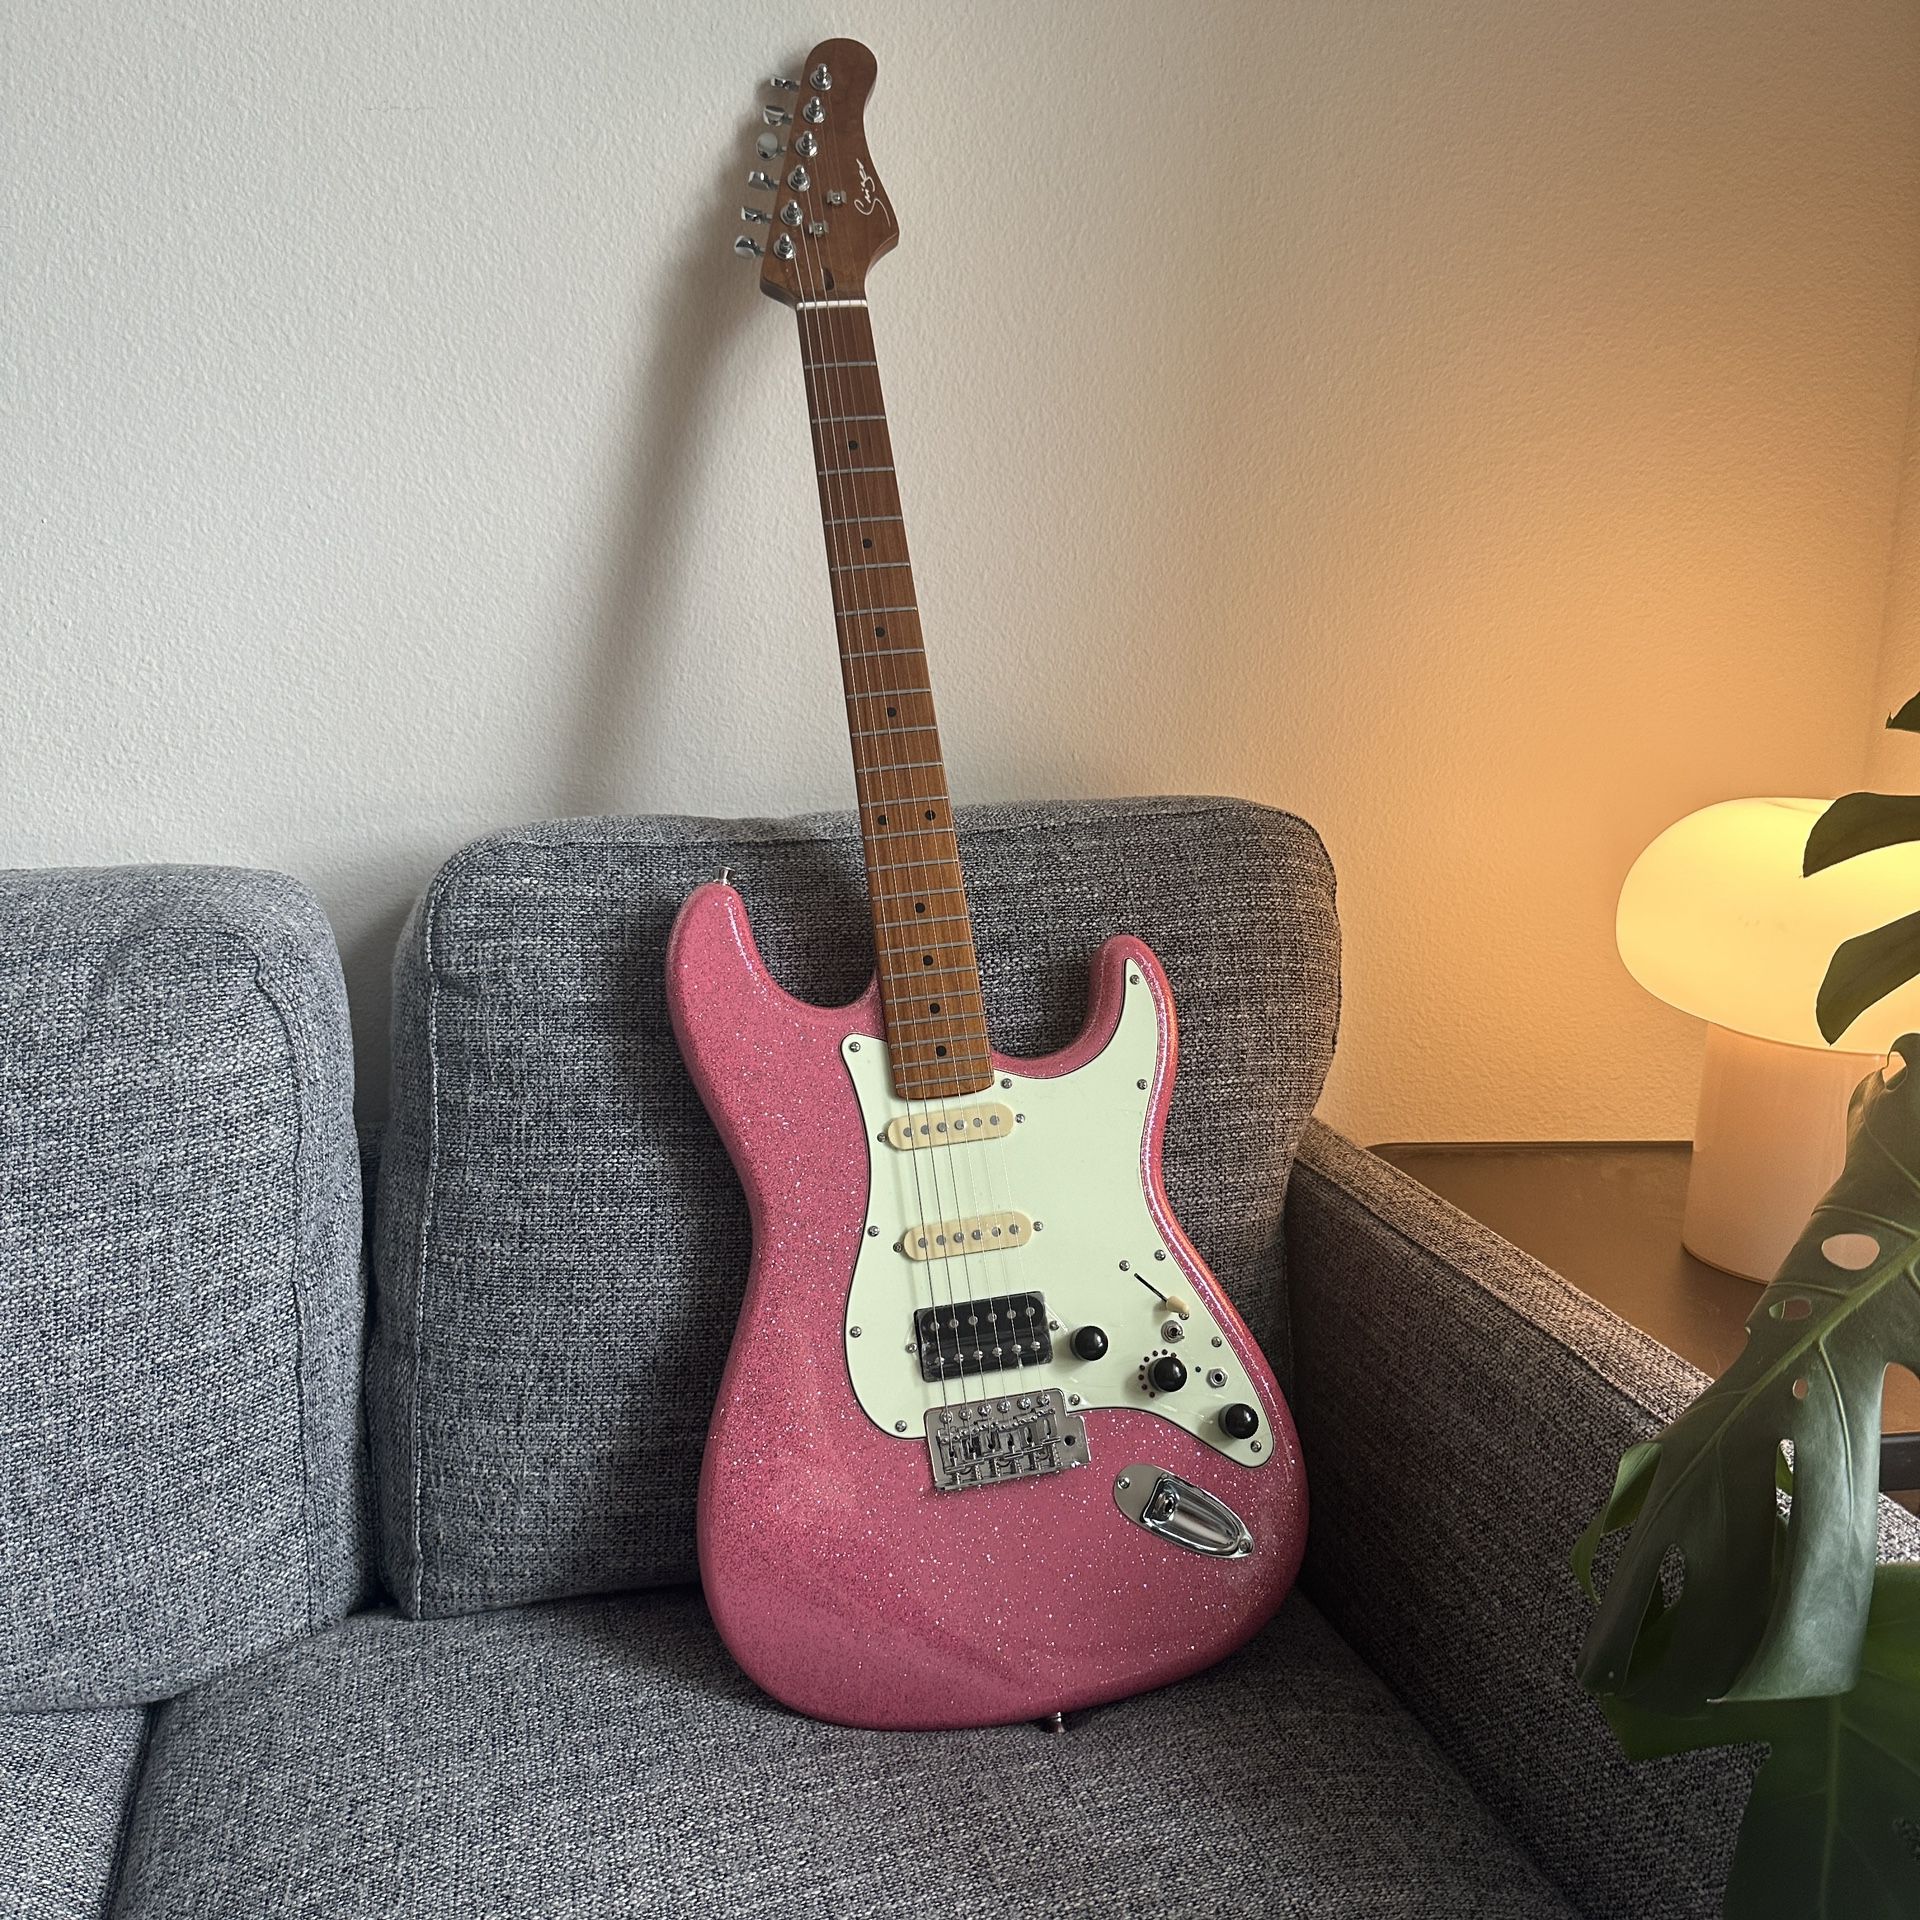 NEW - SPARKLE Pink Guitar With Built-Effects